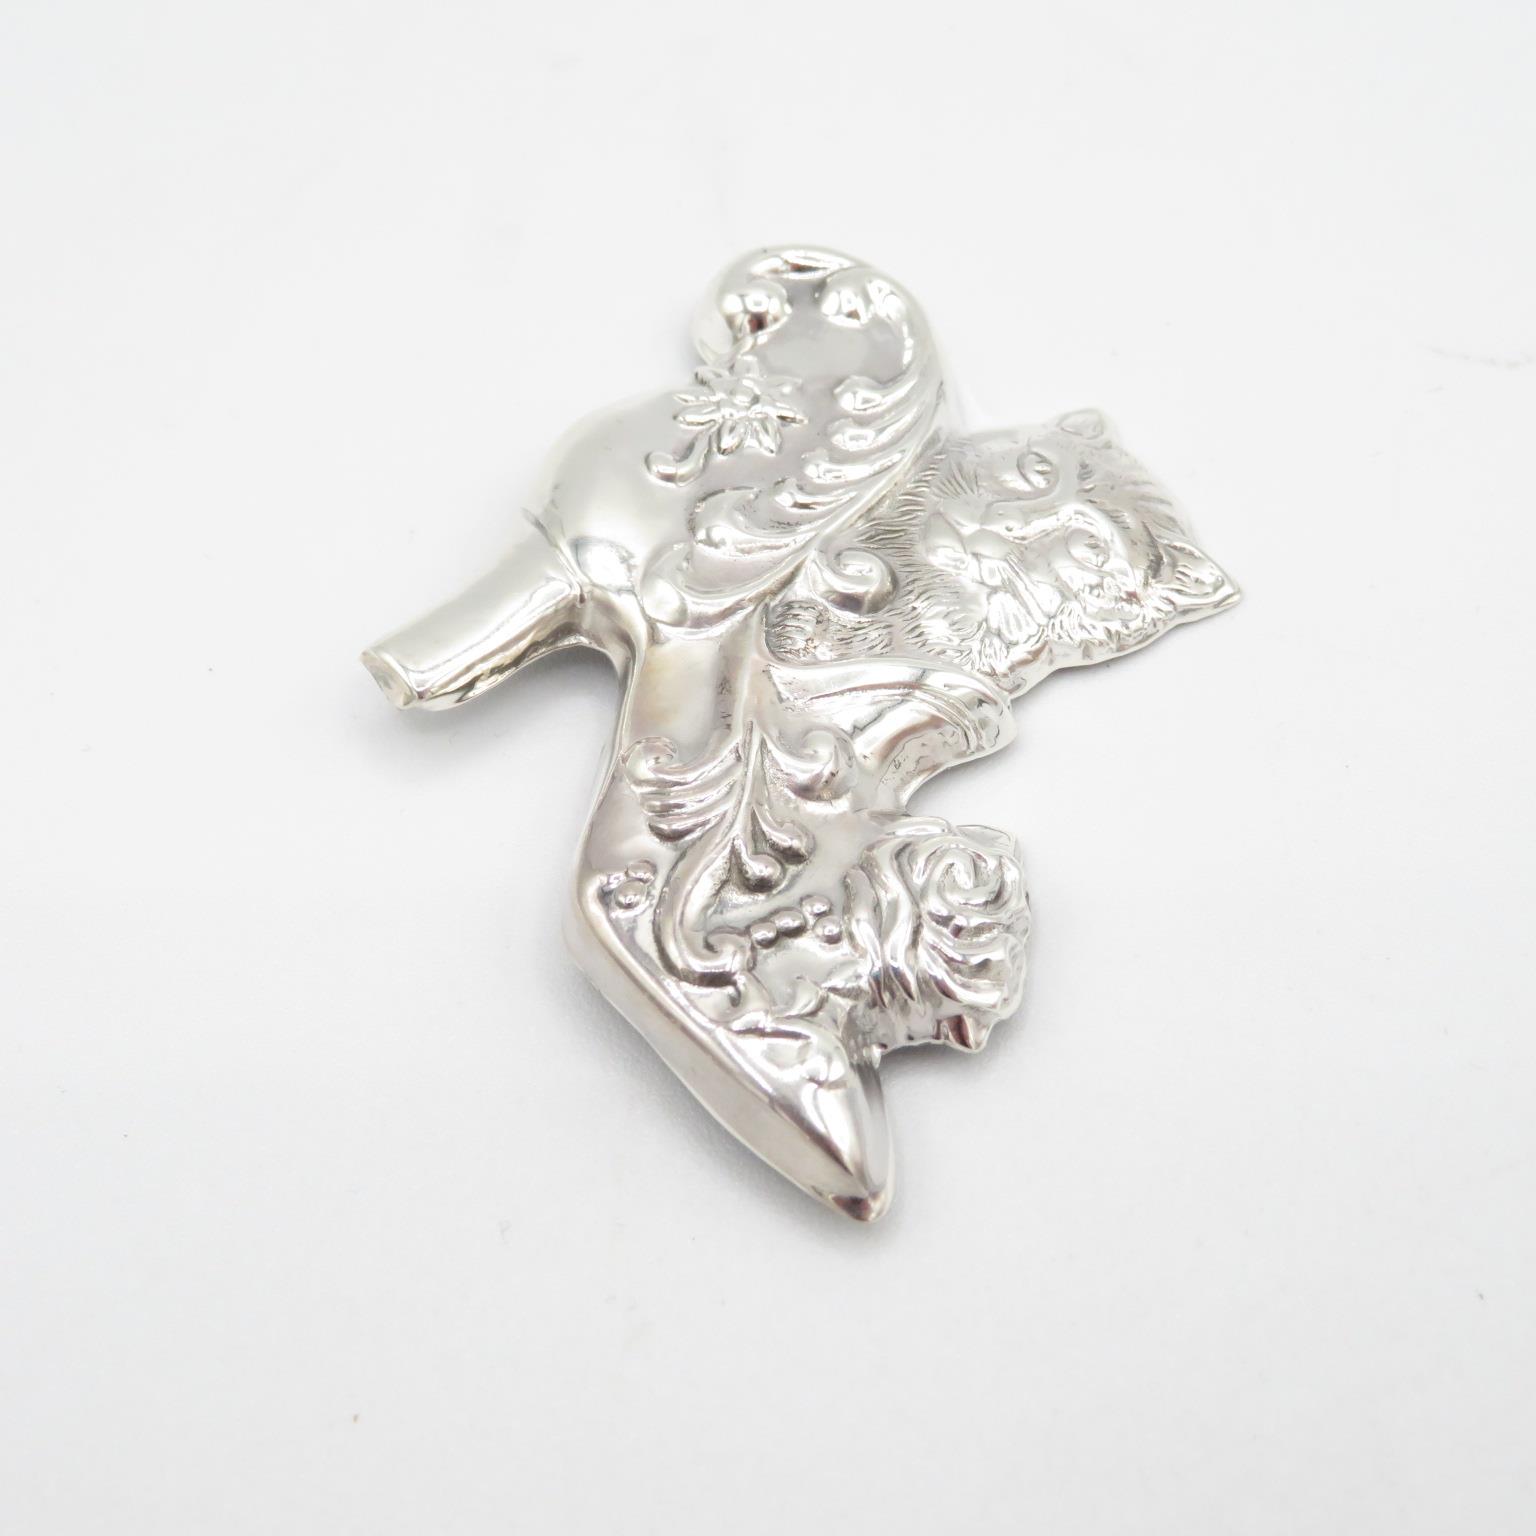 Pussycat in a shoe in HM Sterling Silver 925 brooch in excellent condition with tight fitting pin ( - Image 2 of 4